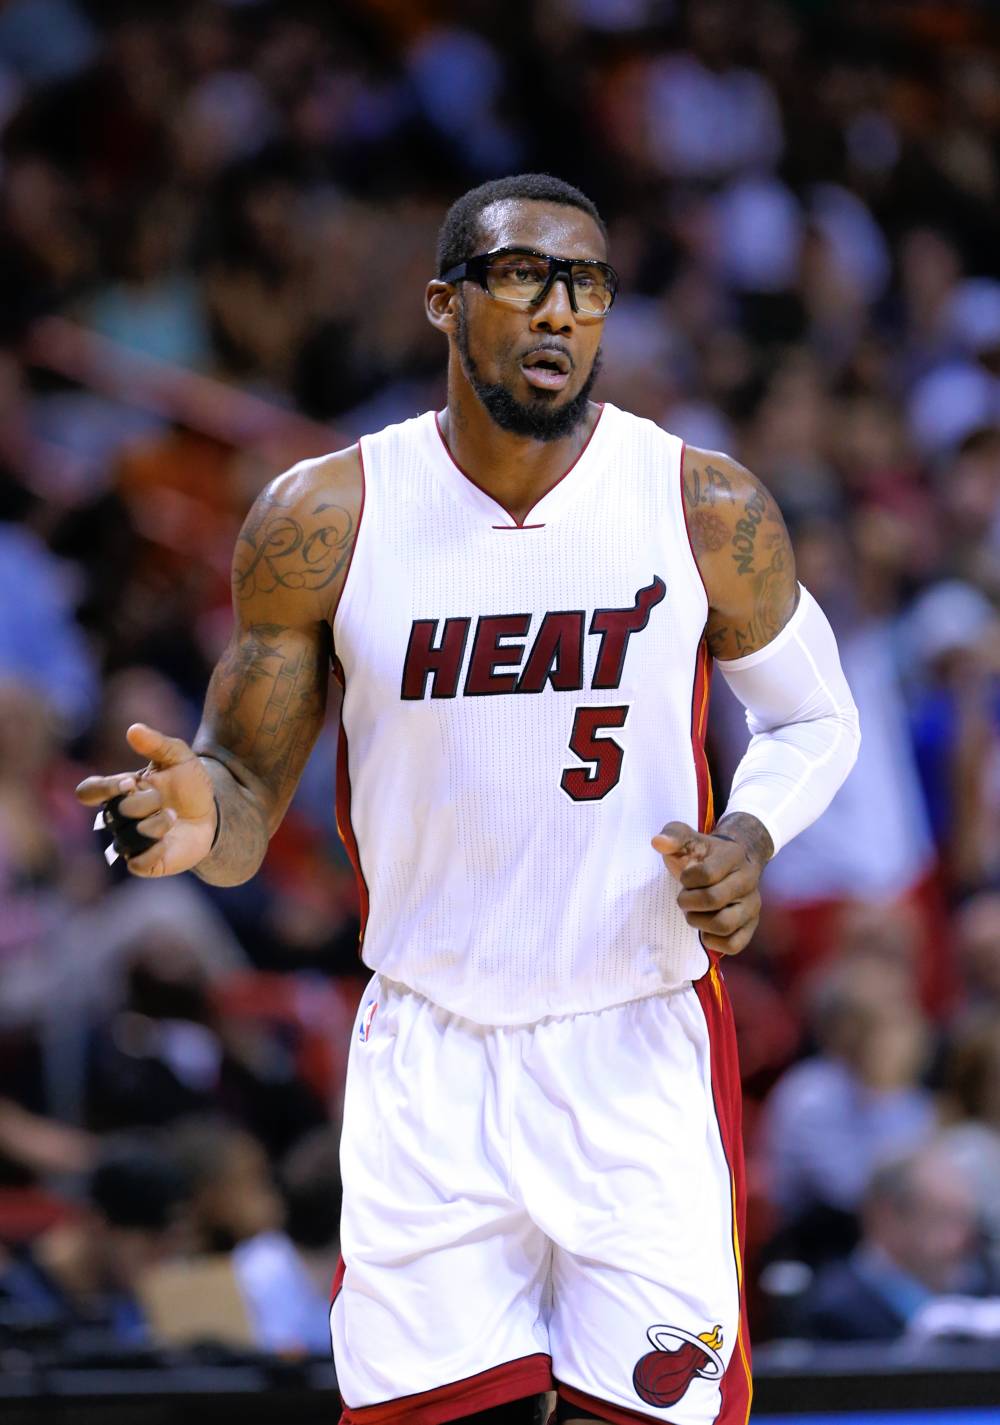 Amar’e Stoudemire Wants to Play at Least 2-3 More Years